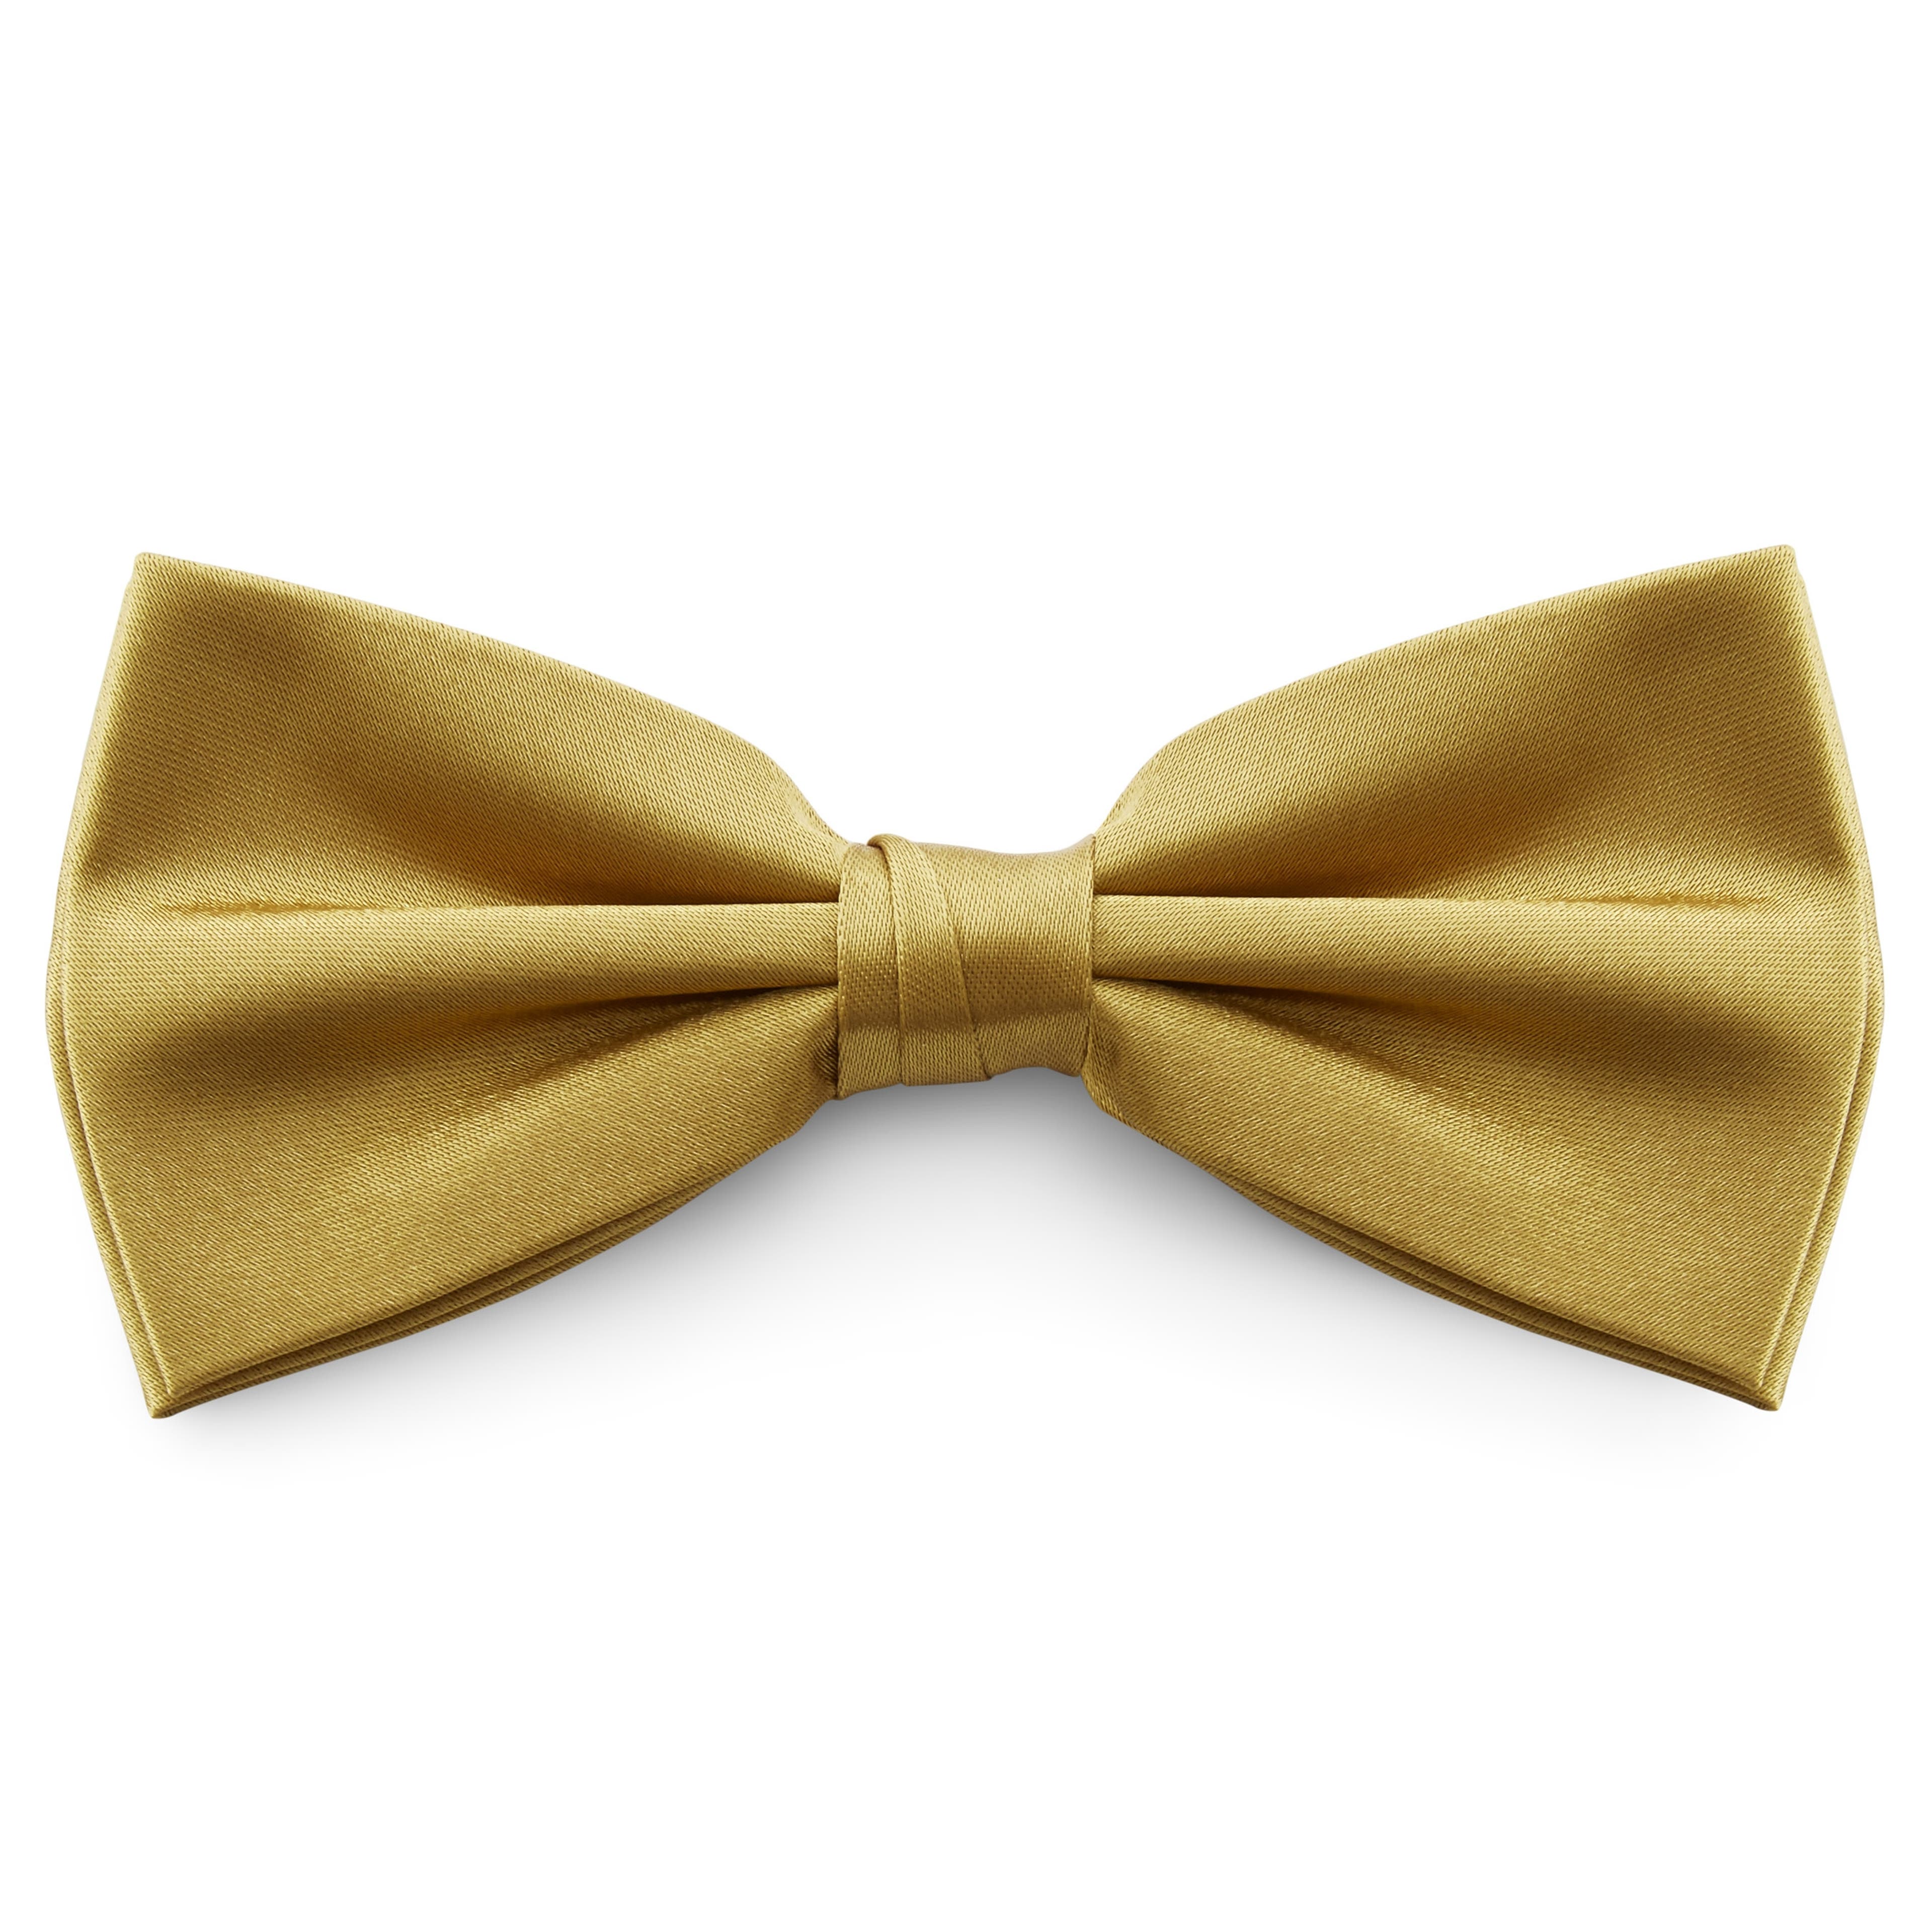 Golden Shiny Basic Pre-Tied Bow Tie